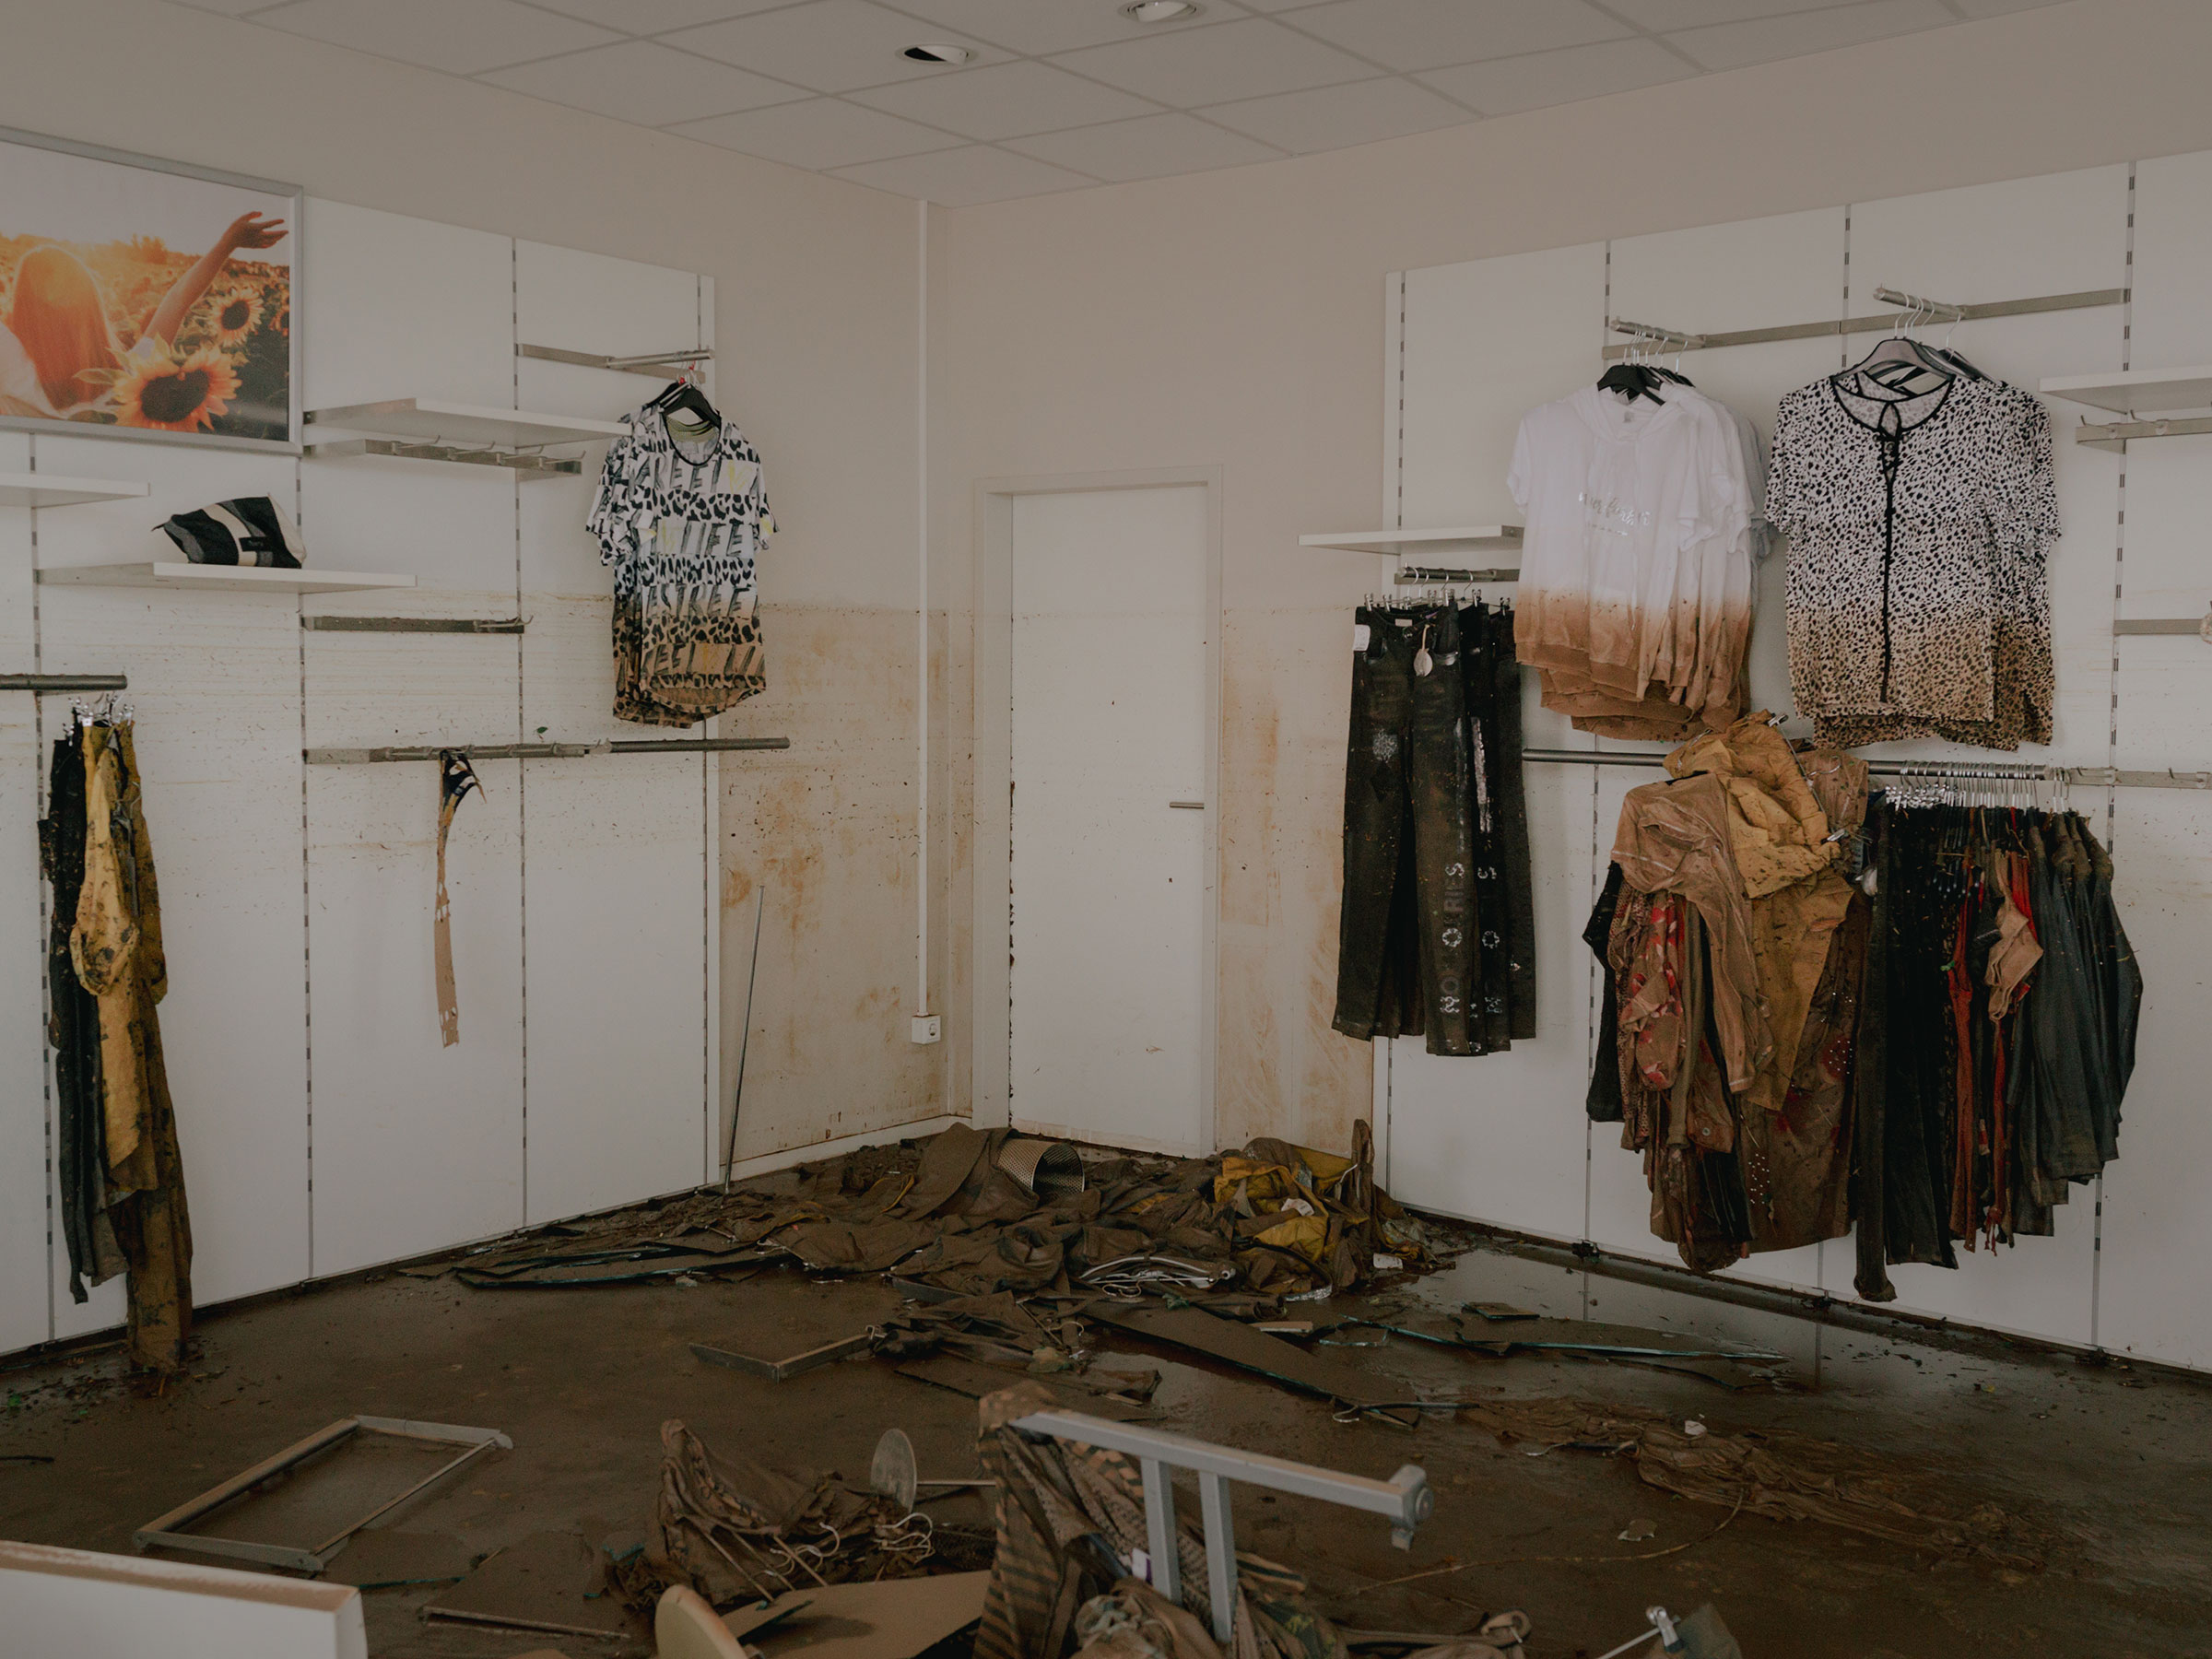 A damaged clothing store in the aftermath of the floods in the city center of Euskirchen, Germany, on July 16. (DOCKS Collective)